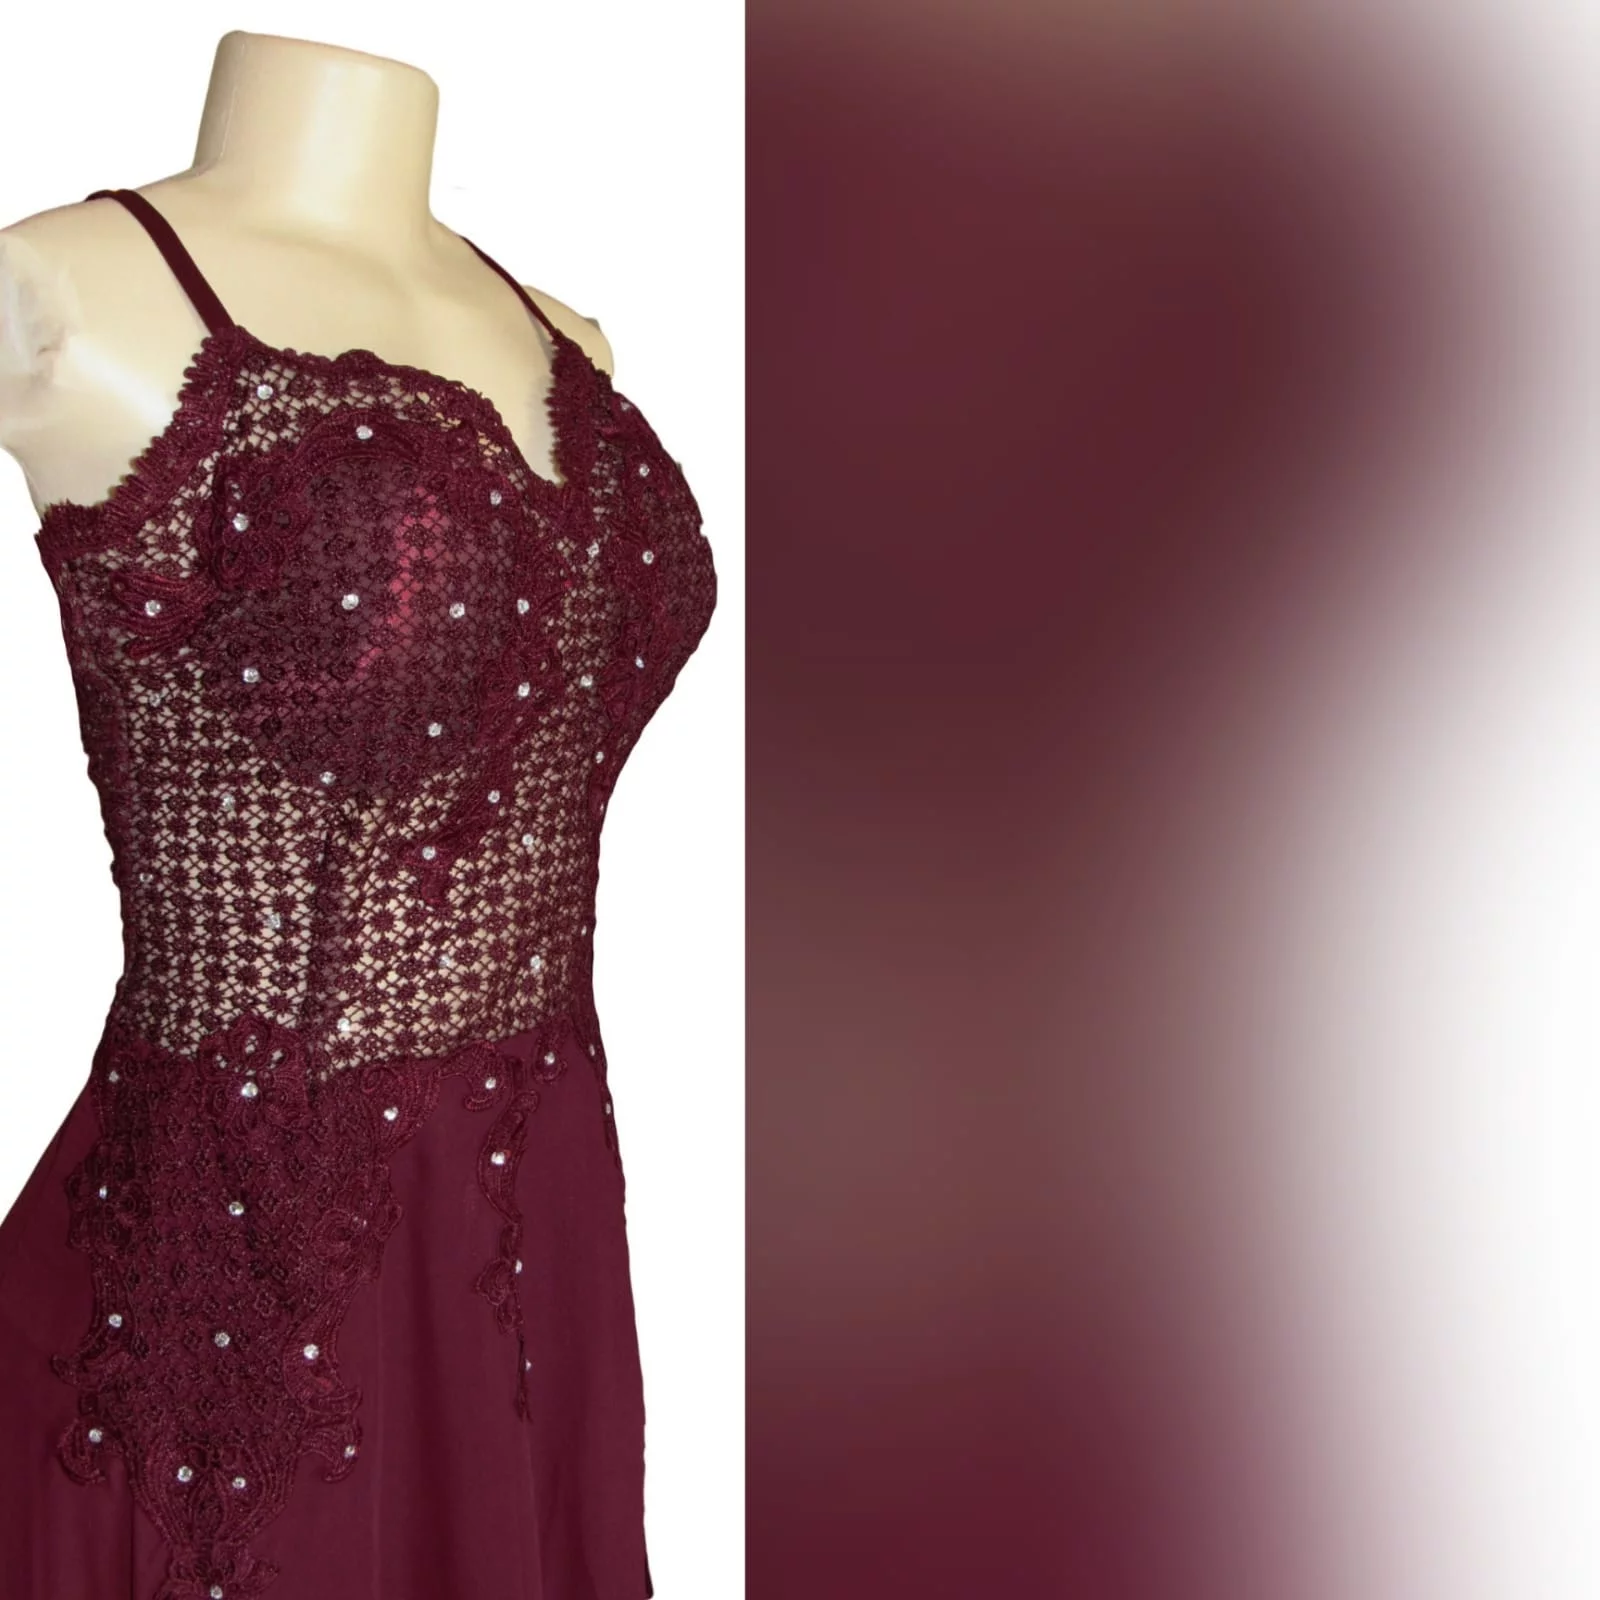 Burgundy chiffon and lace matric dance dress 6 burgundy chiffon and lace matric farewell dress. Bodice in lace, with a v neckline and v low open back, with double shoulder crossed straps. Bodice detailed with silver beads. Bottom in flowy chiffon with a slit.